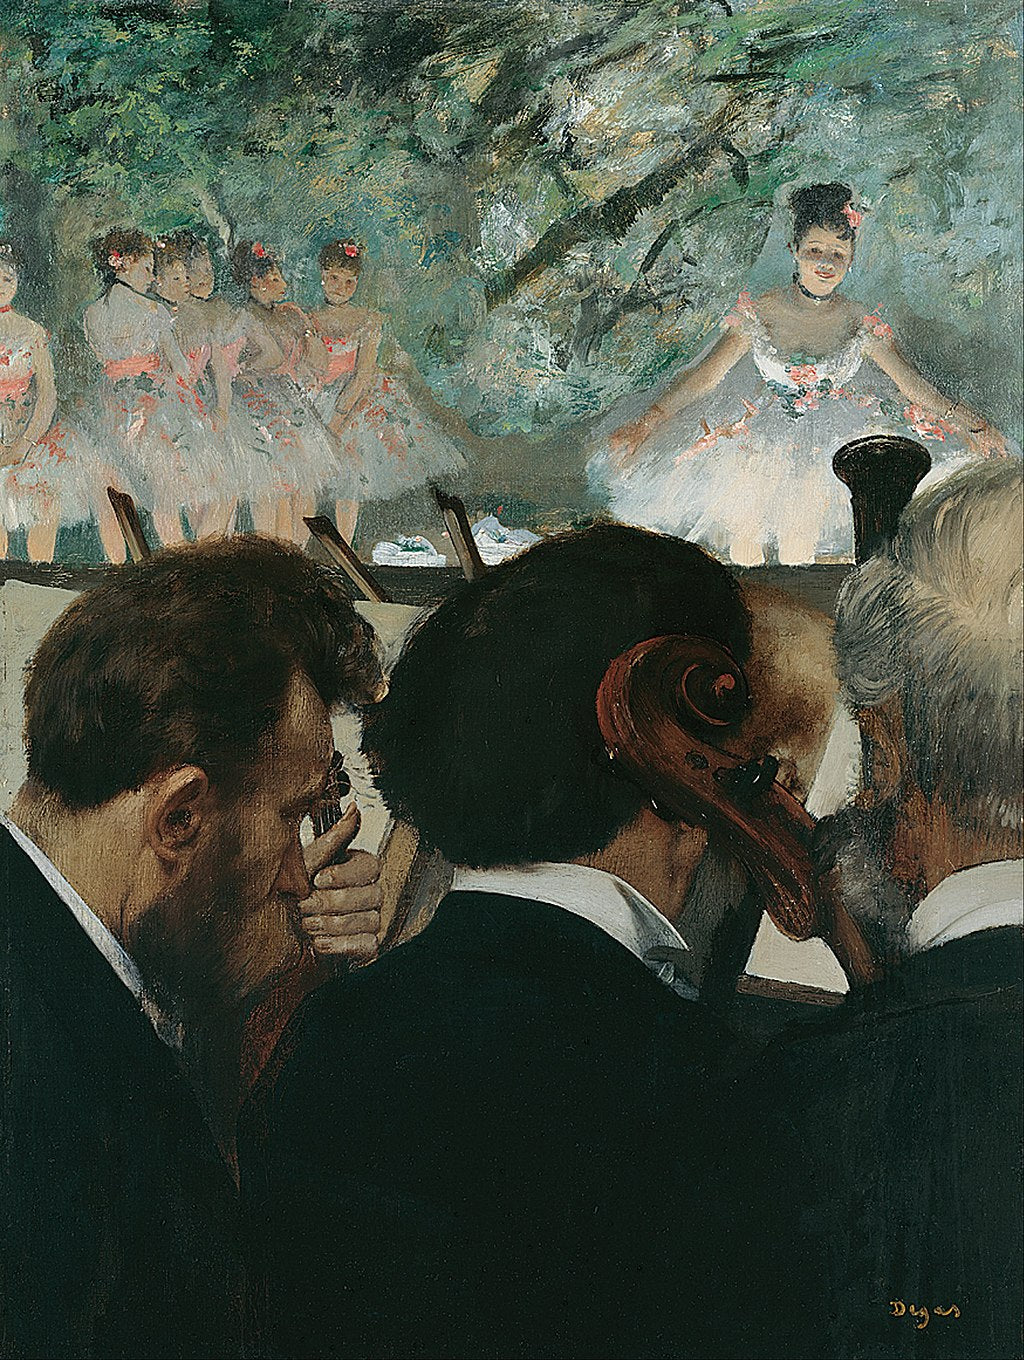 Orchestra Musicians Painting by Edgar Degas Reproduction Oil on Canvas. Blue Surf Art .com